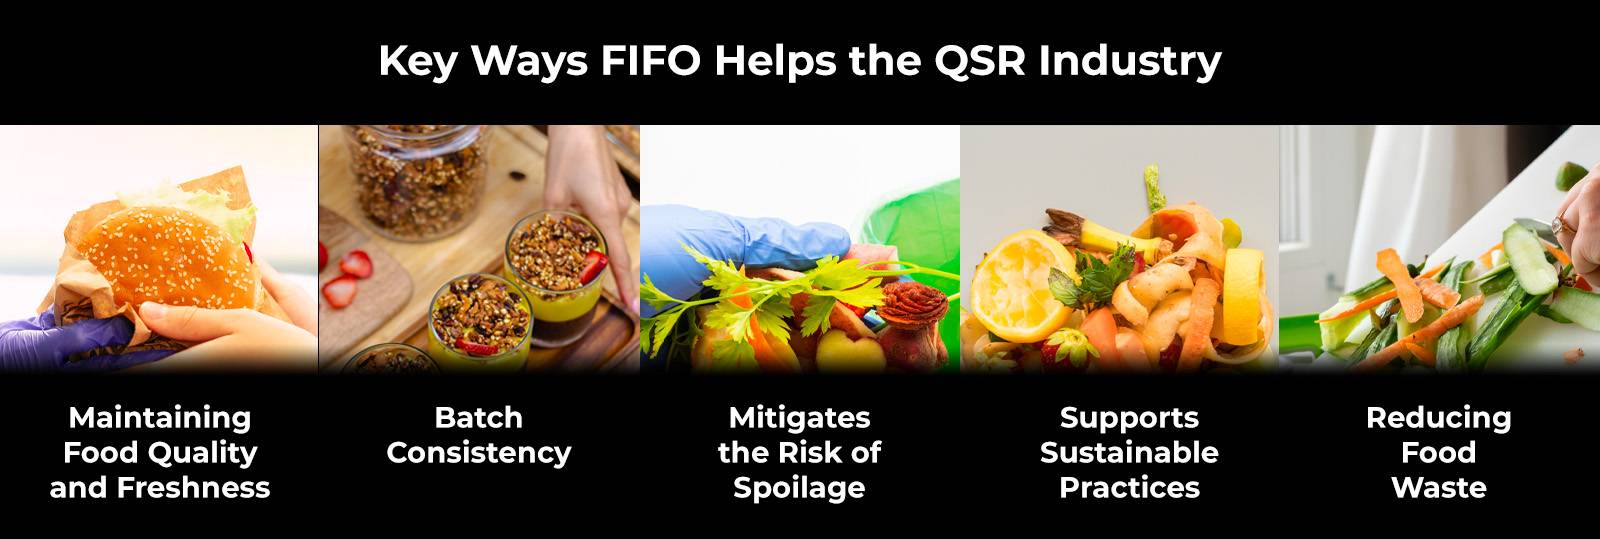 How does FIFO help the QSR industry with last mile delivery